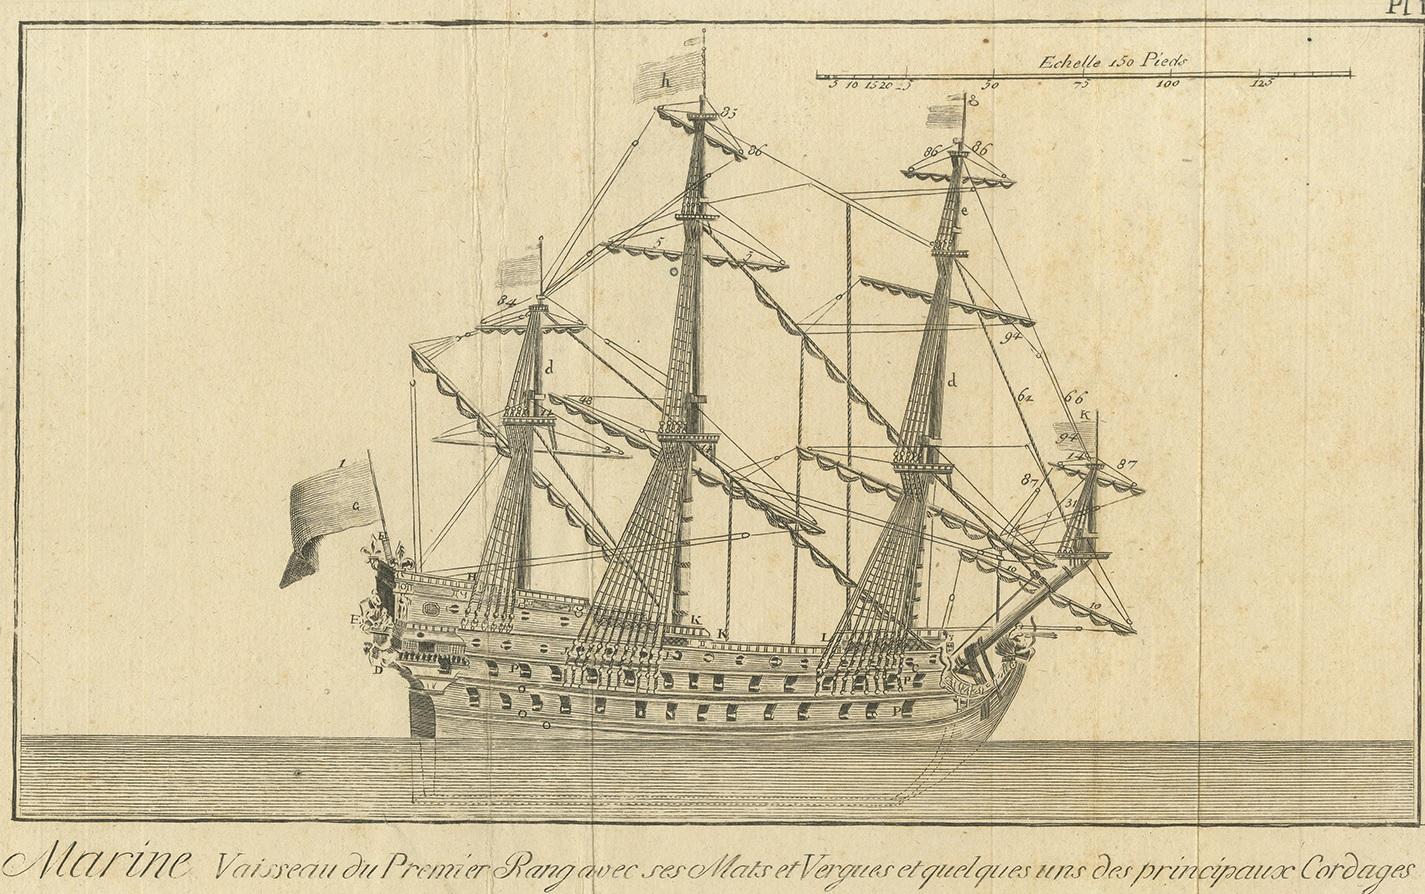 Antique print titled 'Marine Vaisseau du Premier Rang avec ses Mats et Vergues et quelques uns des principaux Cordages'. Engraving of a three-masted man-of-war showing its rigging and intricately carved bow and stern. Source unknown, to be